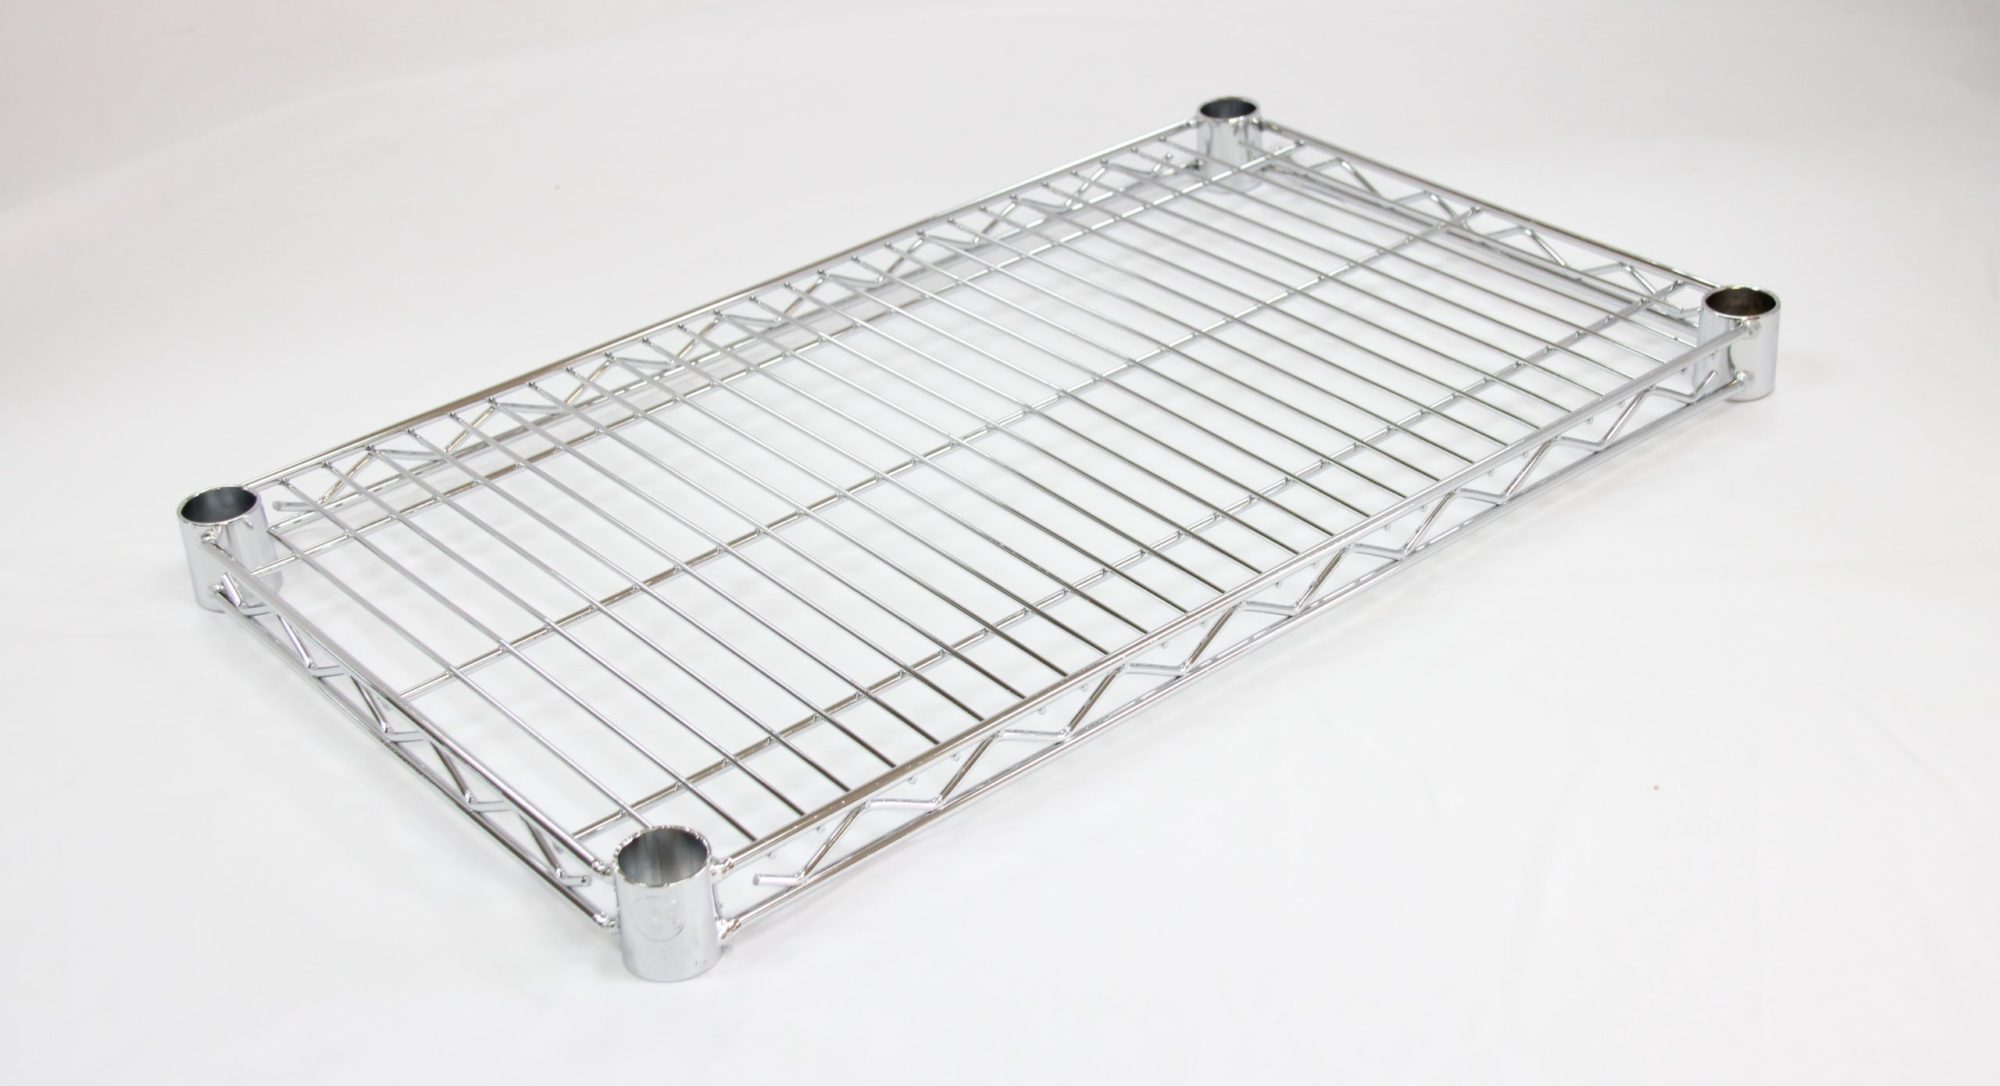 Omcan Wire Mesh Shelving 18" x 30" 20107 Chrome 2 Pack-S1830C